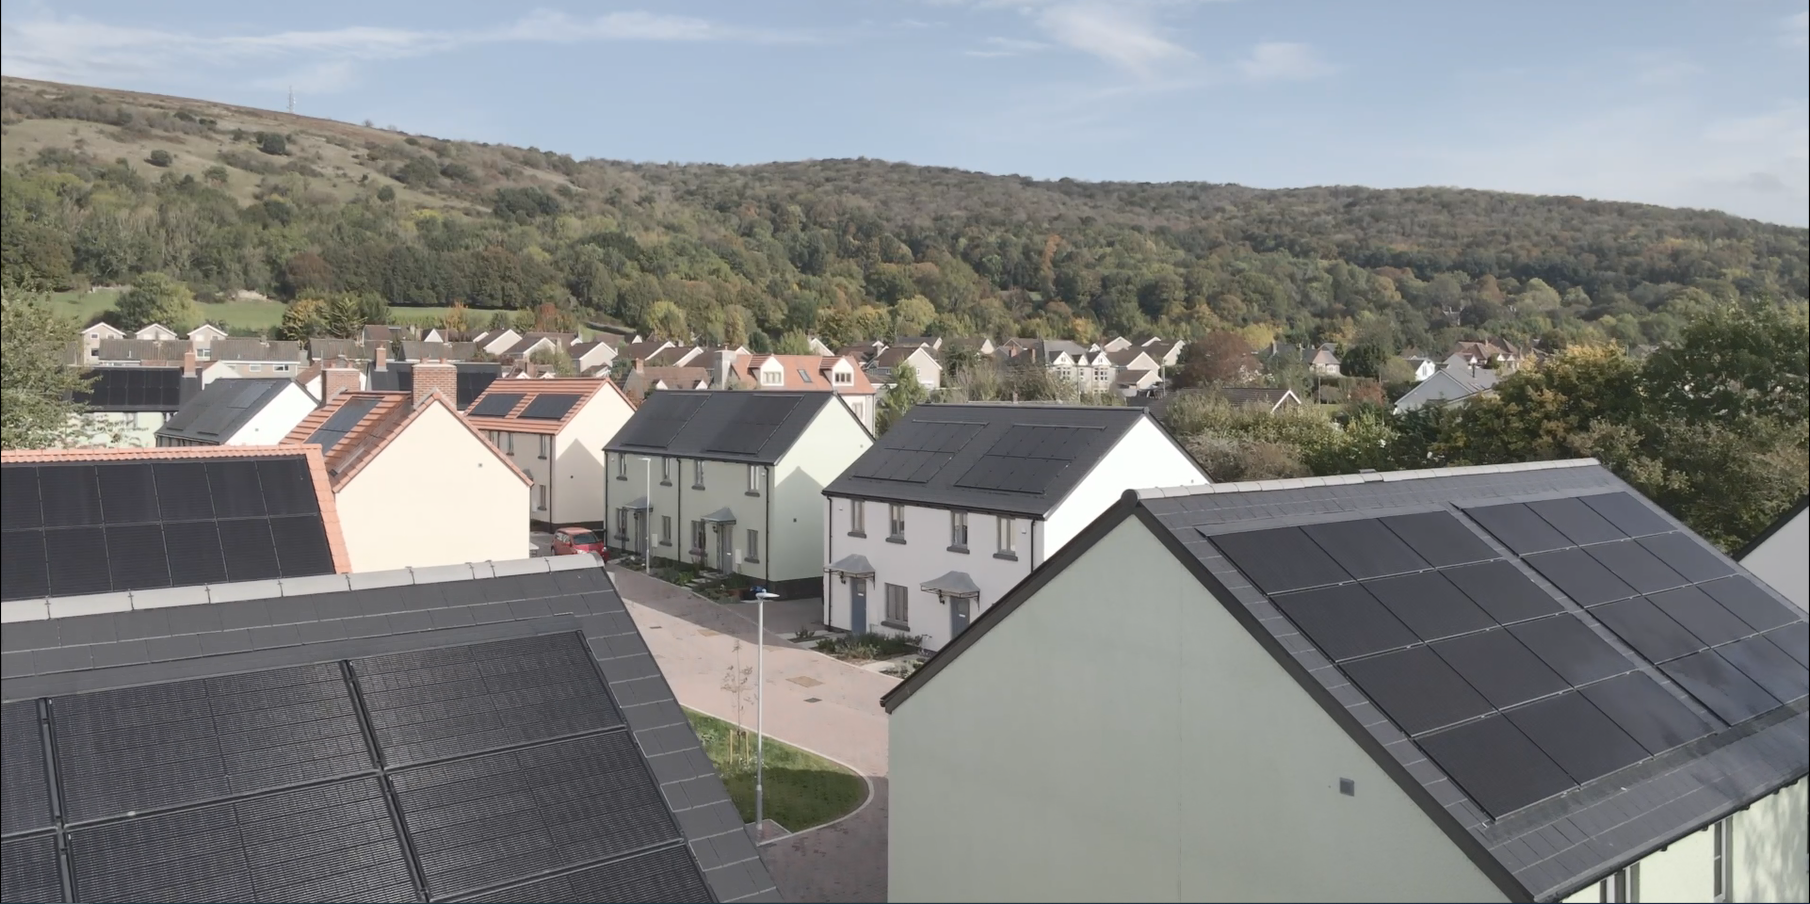 Aerial shot of new-build scheme set in countryside. Homes have solar panels on roofs